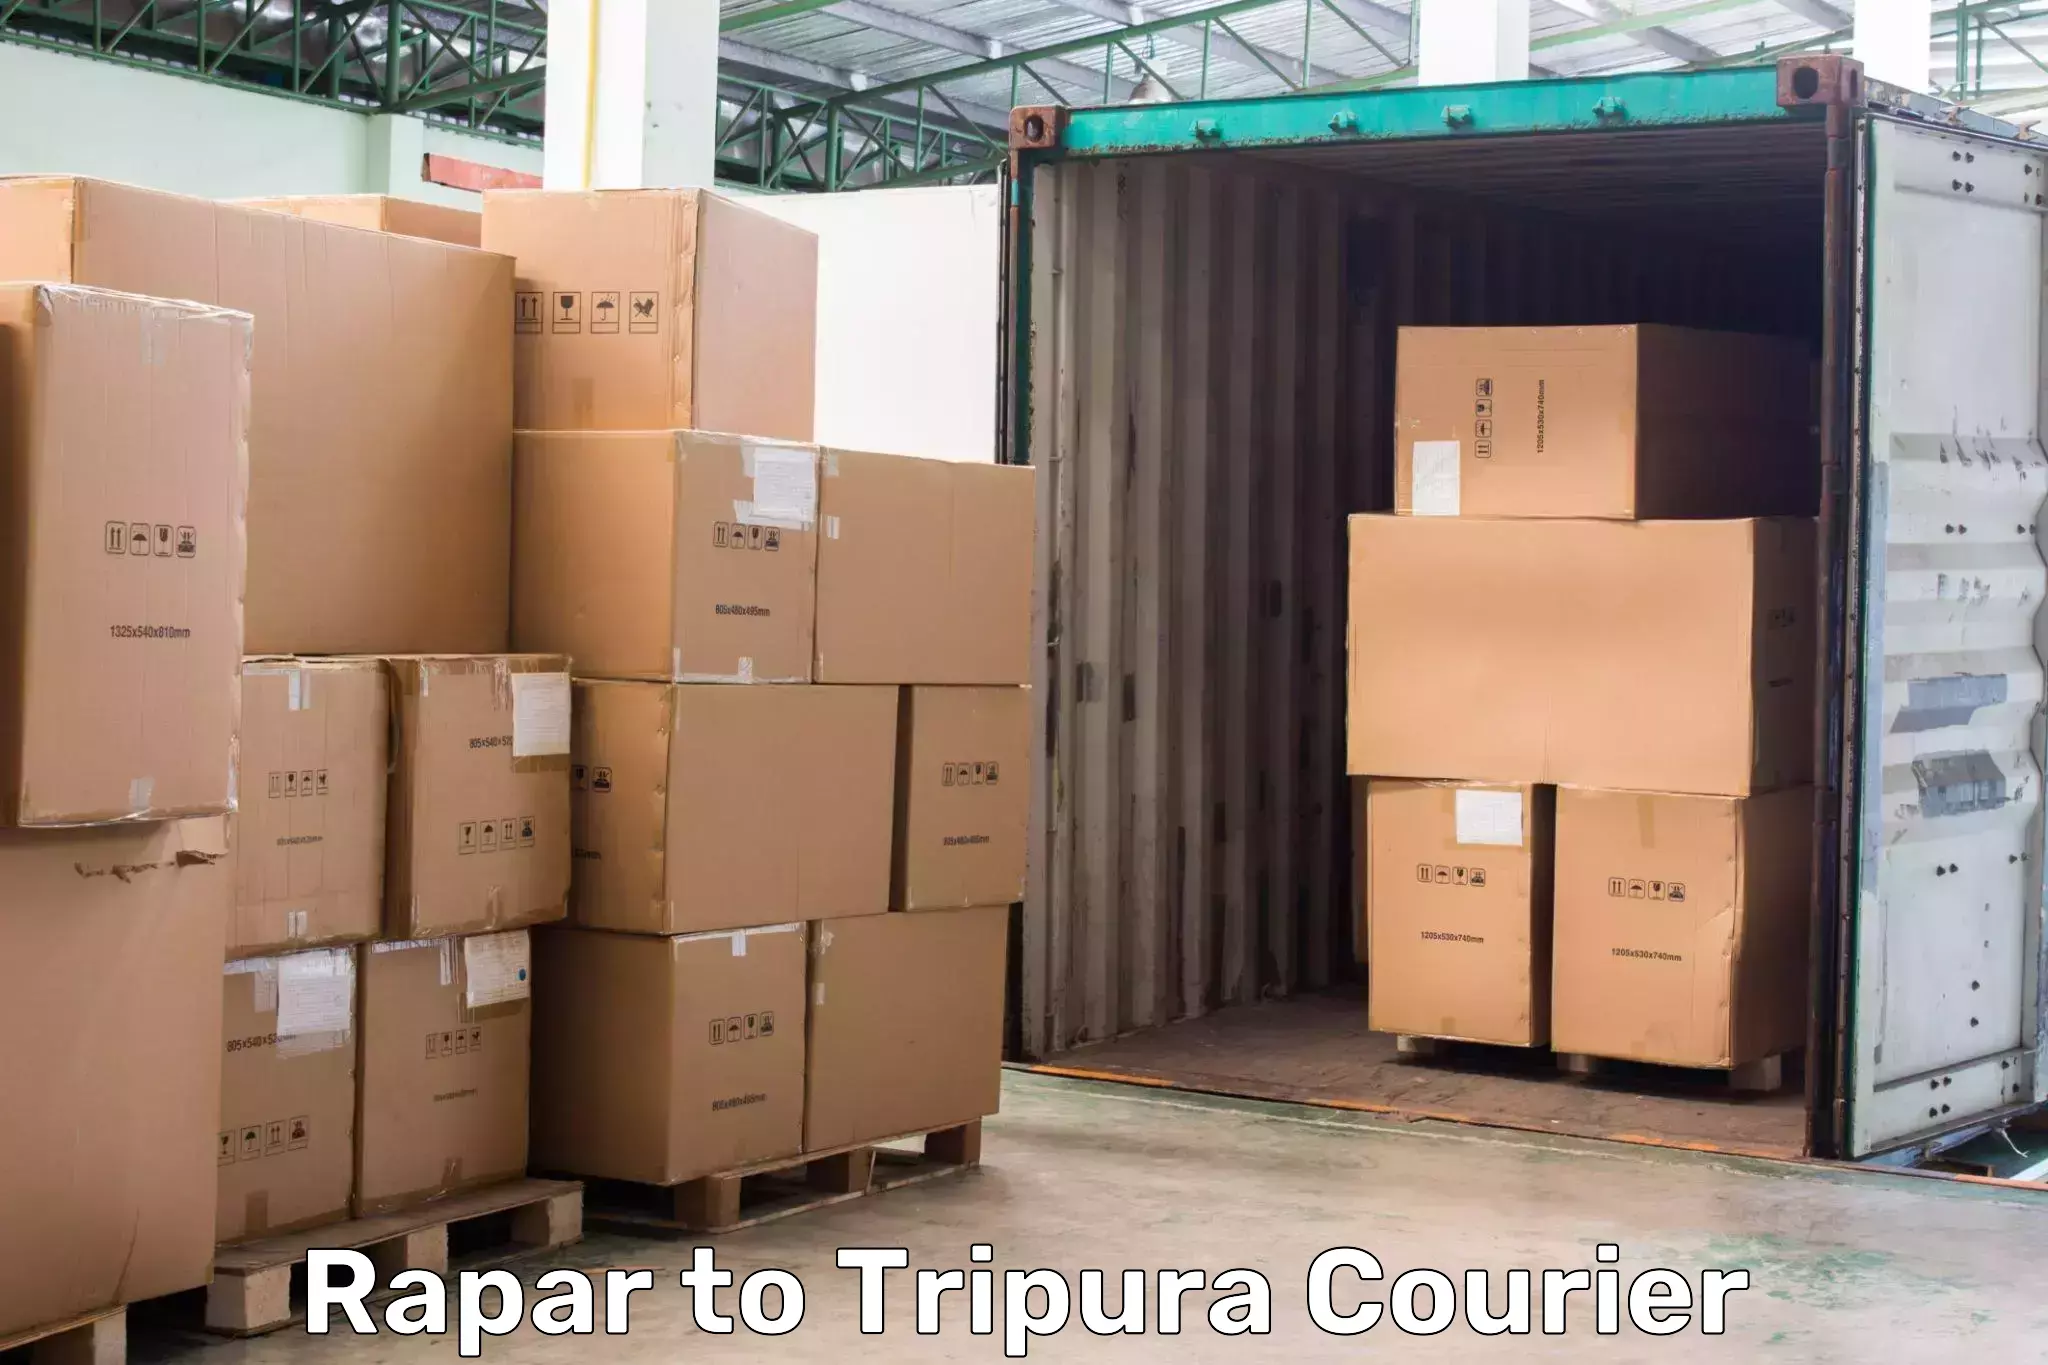 Next-day delivery options Rapar to Udaipur Tripura